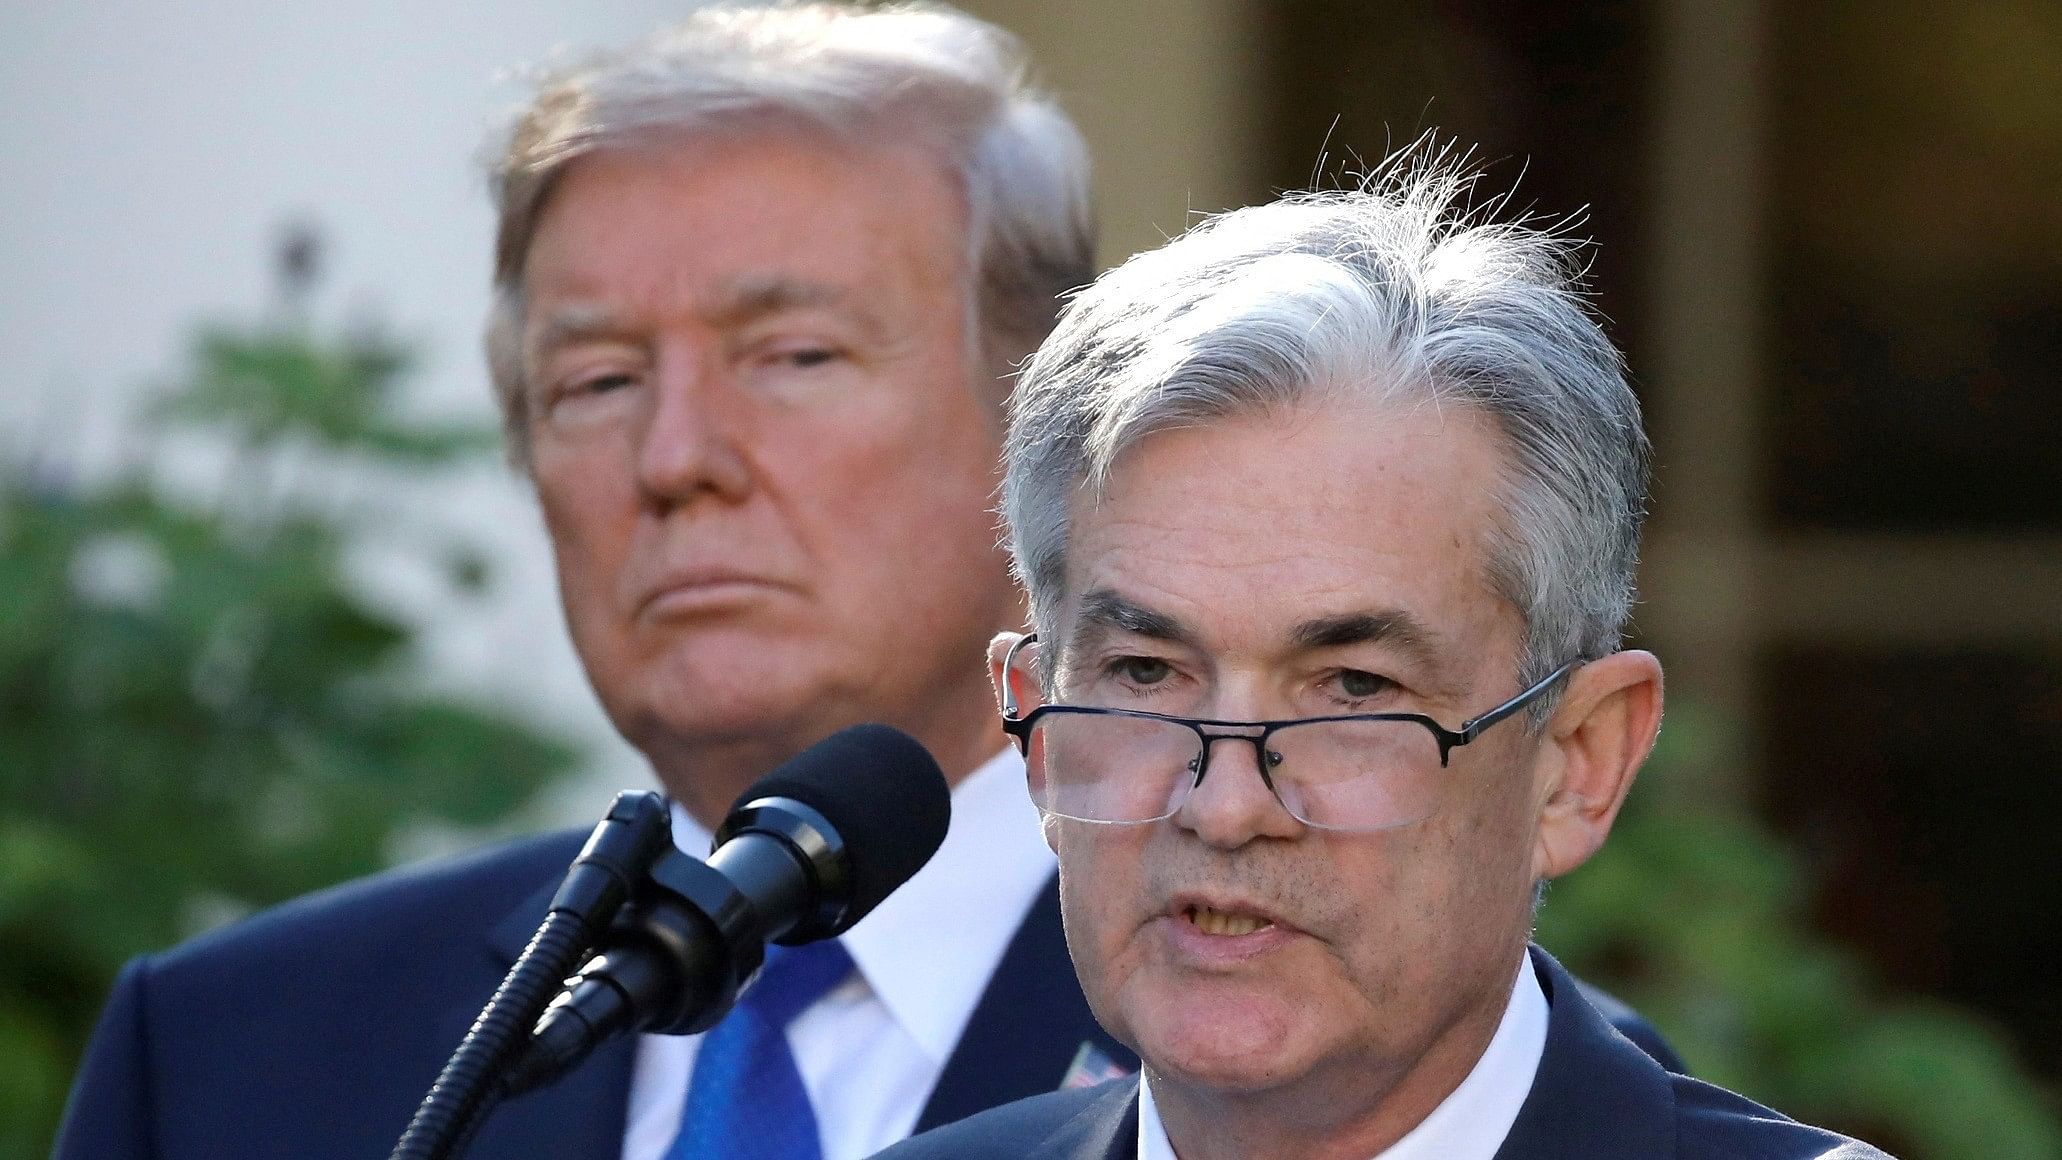 <div class="paragraphs"><p>Trump&nbsp;tapped&nbsp;Powell&nbsp;in 2017 to lead the US central bank but the Republican president turned against him soon after his February 2018 swearing-in.</p></div>